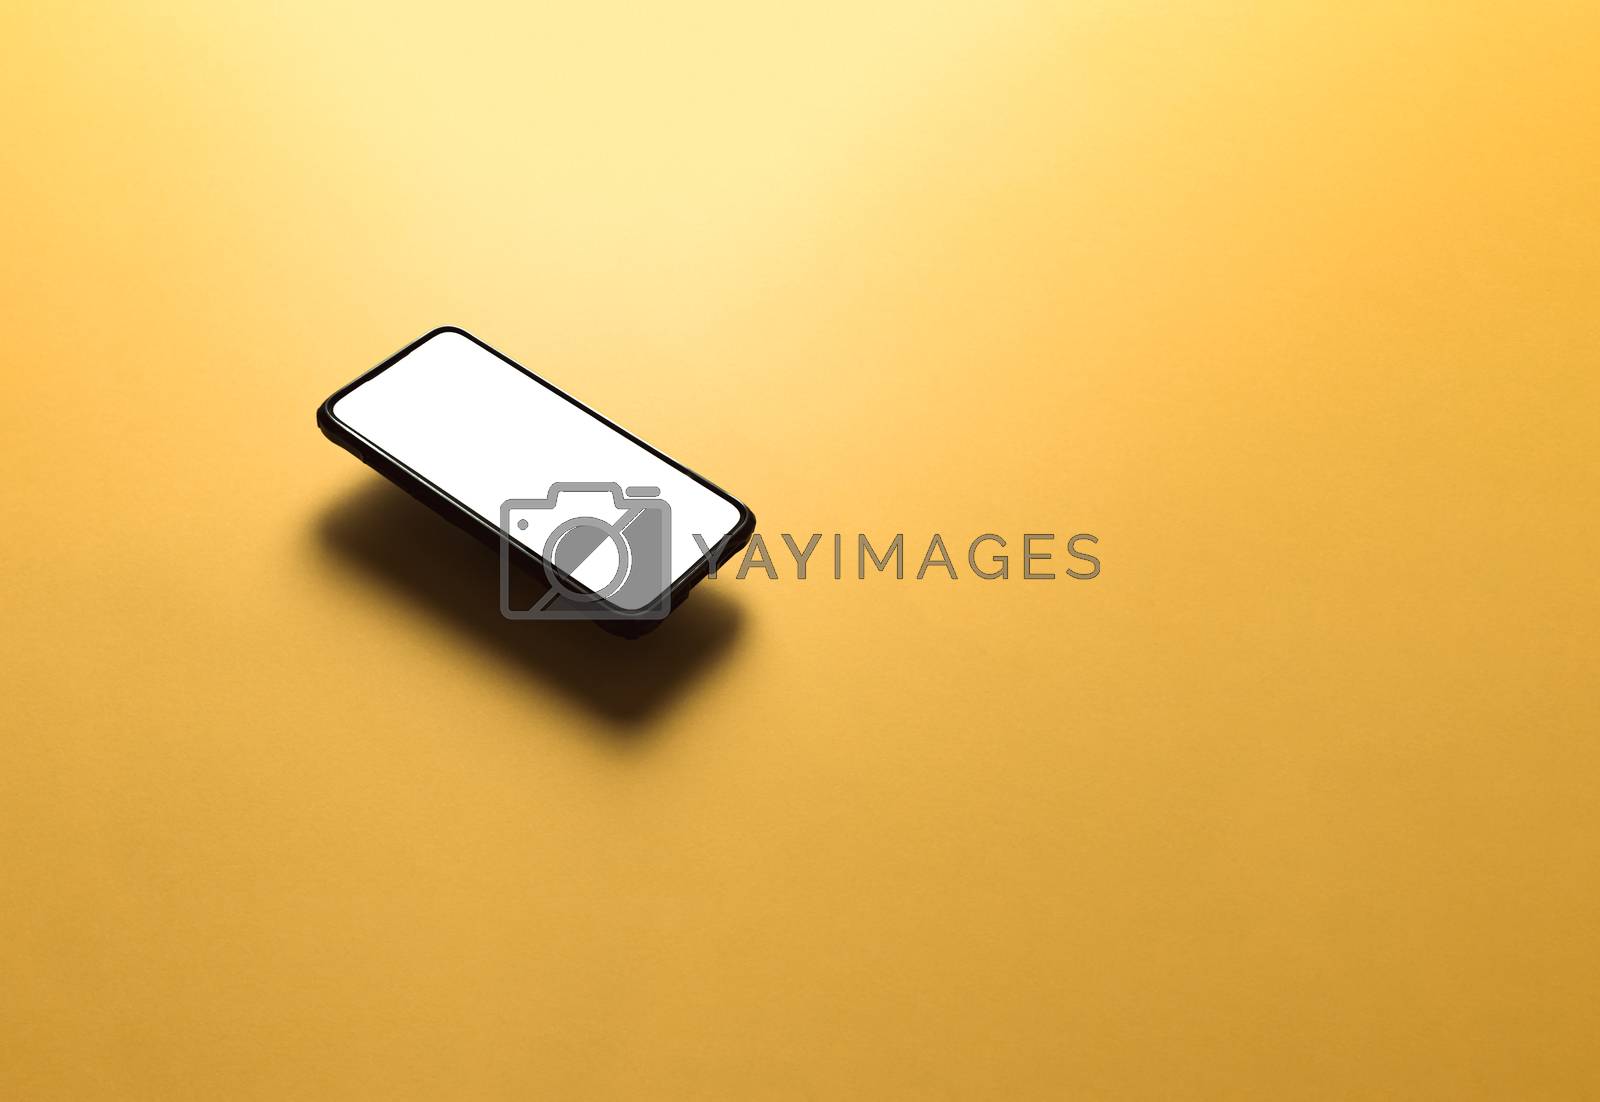 Royalty free image of Minimalistic mock up flat image design with a floating mobile phone with copy space and white scree to write over it over a flat yellow background by AveCalvar